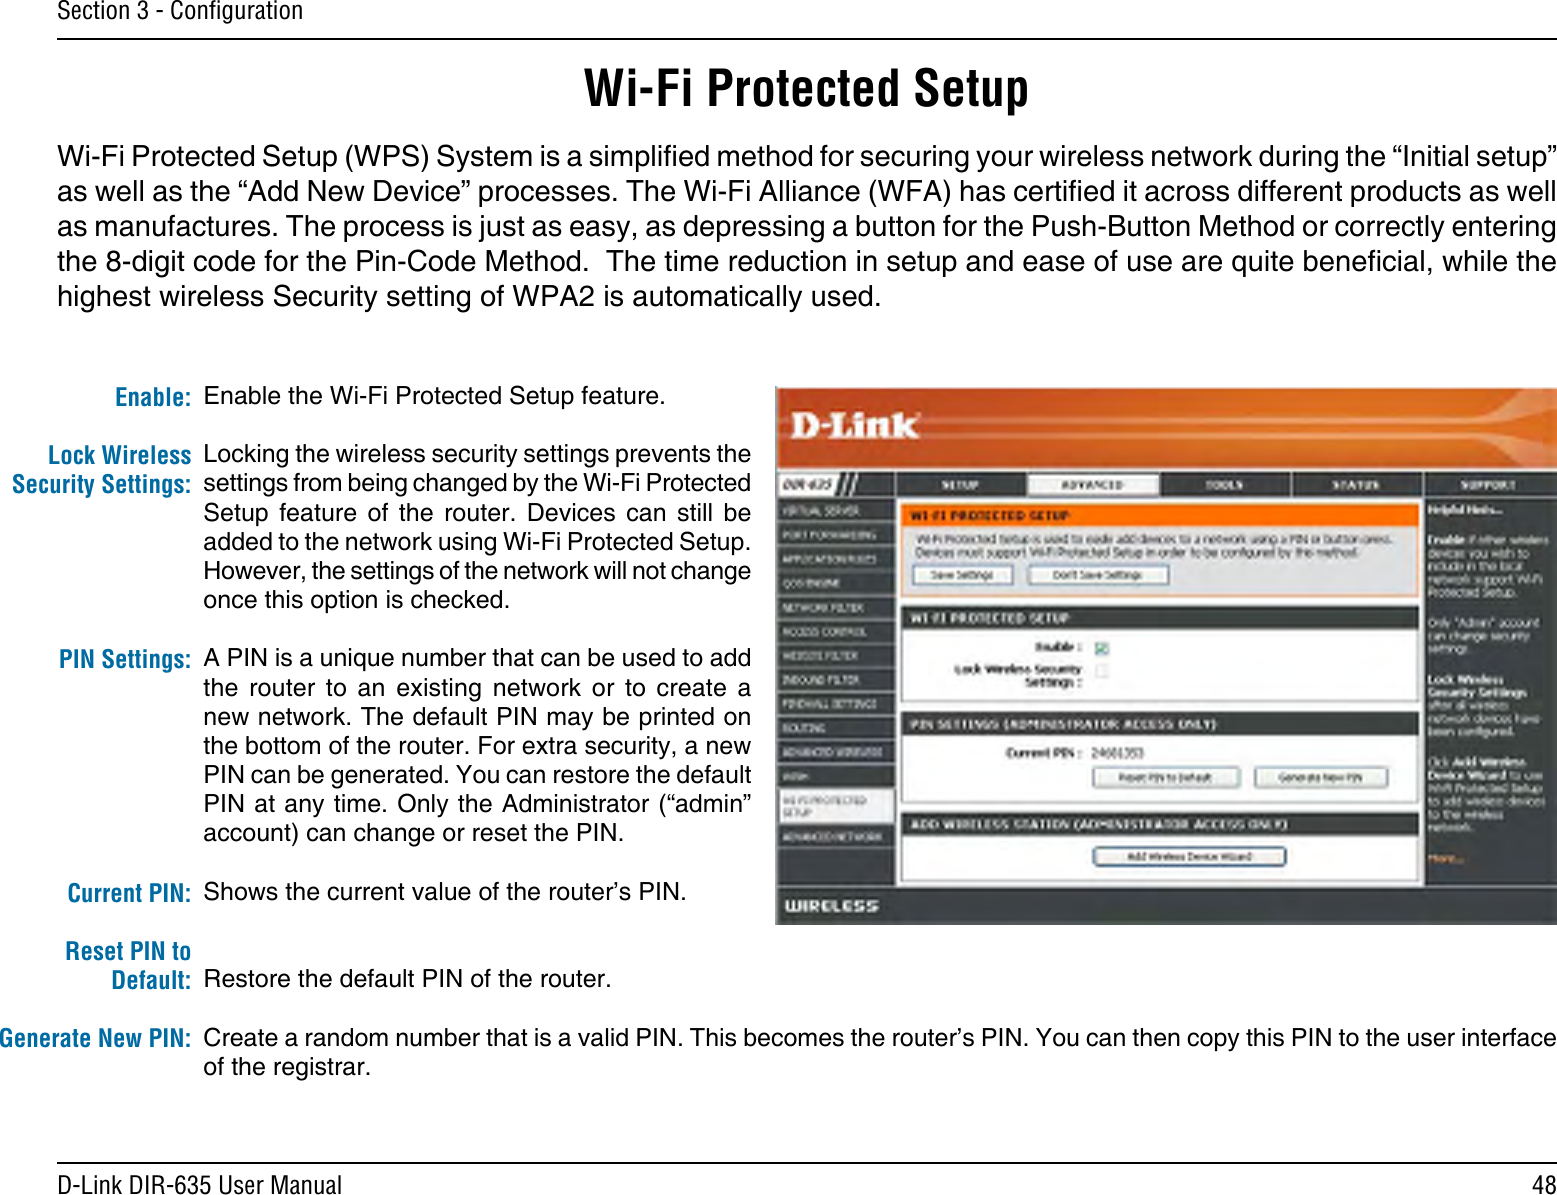 48D-Link DIR-635 User ManualSection 3 - ConﬁgurationEnable the Wi-Fi Protected Setup feature. Locking the wireless security settings prevents the settings from being changed by the Wi-Fi Protected Setup  feature  of  the  router.  Devices  can  still  be added to the network using Wi-Fi Protected Setup. However, the settings of the network will not change once this option is checked.A PIN is a unique number that can be used to add the  router  to  an  existing  network  or  to  create  a new network. The default PIN may be printed on the bottom of the router. For extra security, a new PIN can be generated. You can restore the default PIN at any time. Only the Administrator (“admin” account) can change or reset the PIN. Shows the current value of the router’s PIN. Restore the default PIN of the router. Create a random number that is a valid PIN. This becomes the router’s PIN. You can then copy this PIN to the user interface of the registrar.Enable:Lock Wireless Security Settings:PIN Settings:Current PIN:Reset PIN to Default:Generate New PIN:Wi-Fi Protected SetupWi-Fi Protected Setup (WPS) System is a simplied method for securing your wireless network during the “Initial setup” as well as the “Add New Device” processes. The Wi-Fi Alliance (WFA) has certied it across different products as well as manufactures. The process is just as easy, as depressing a button for the Push-Button Method or correctly entering the 8-digit code for the Pin-Code Method.  The time reduction in setup and ease of use are quite benecial, while the highest wireless Security setting of WPA2 is automatically used.